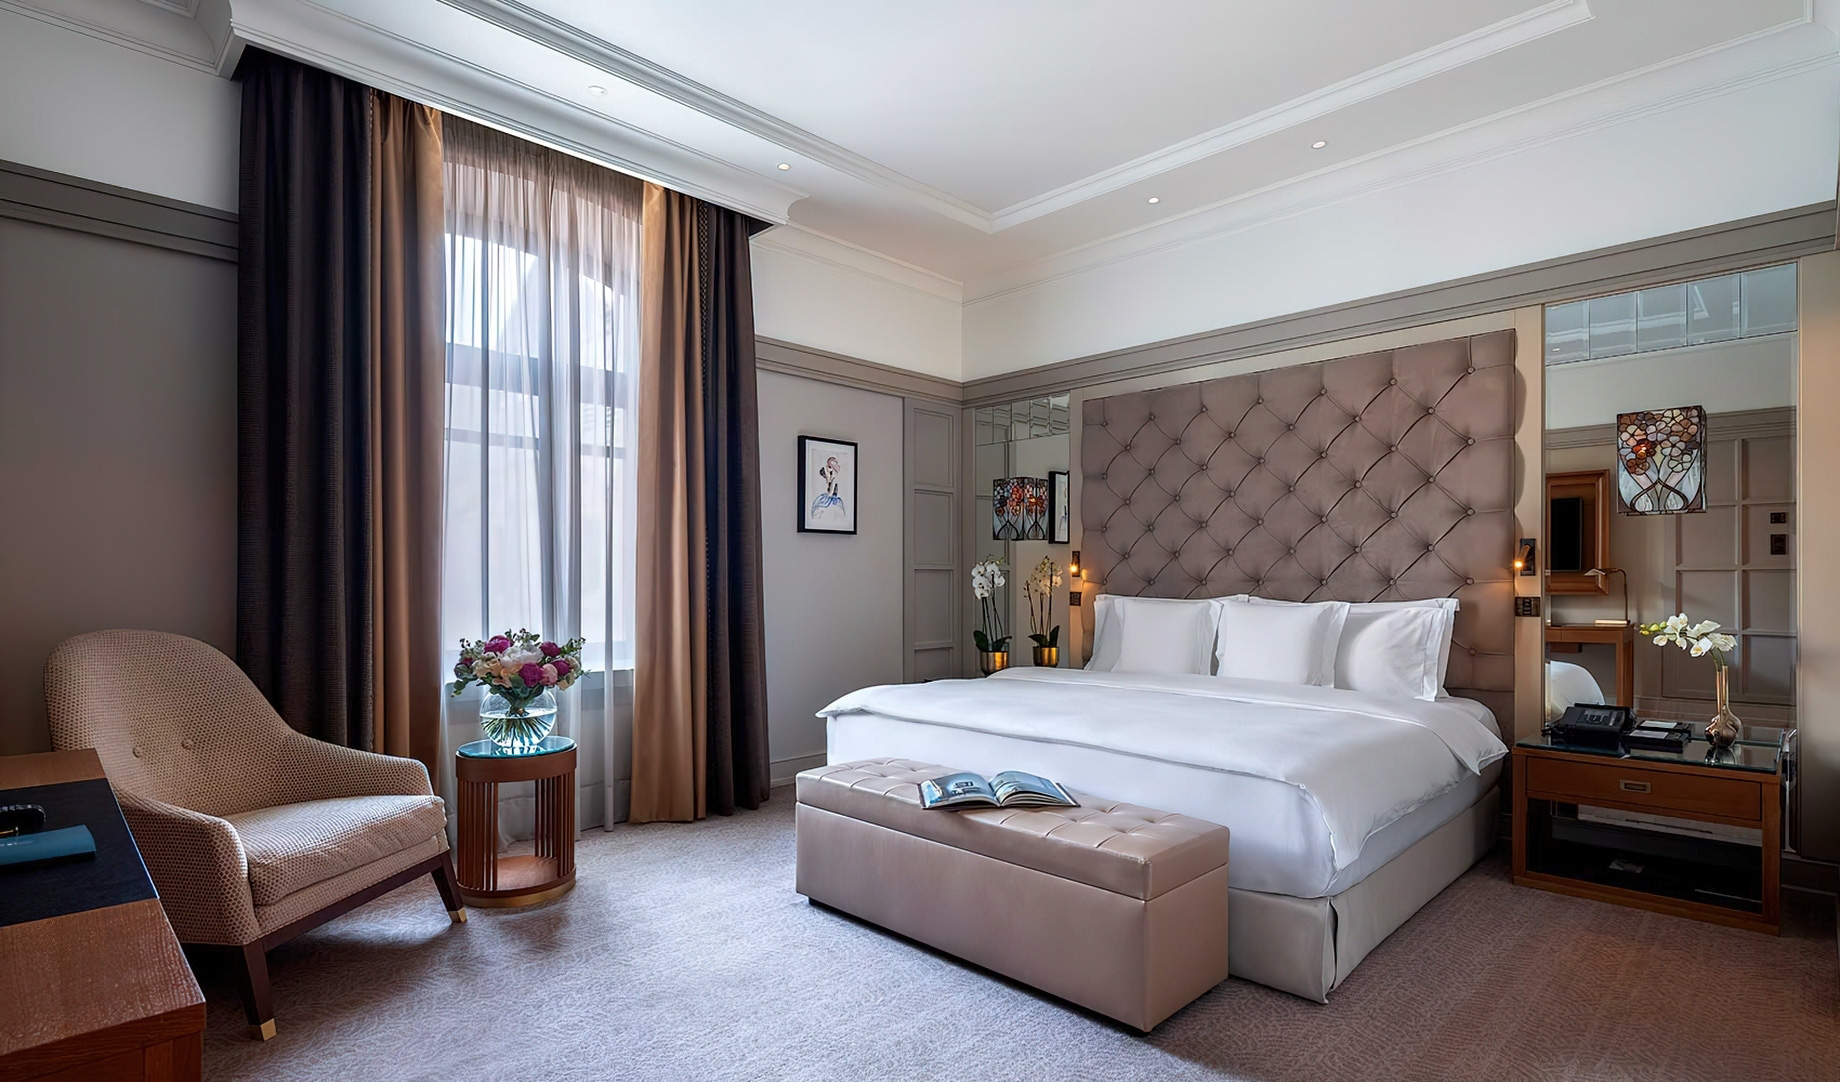 Metropol Hotel Moscow – Moscow, Russia – Executive Room Interior